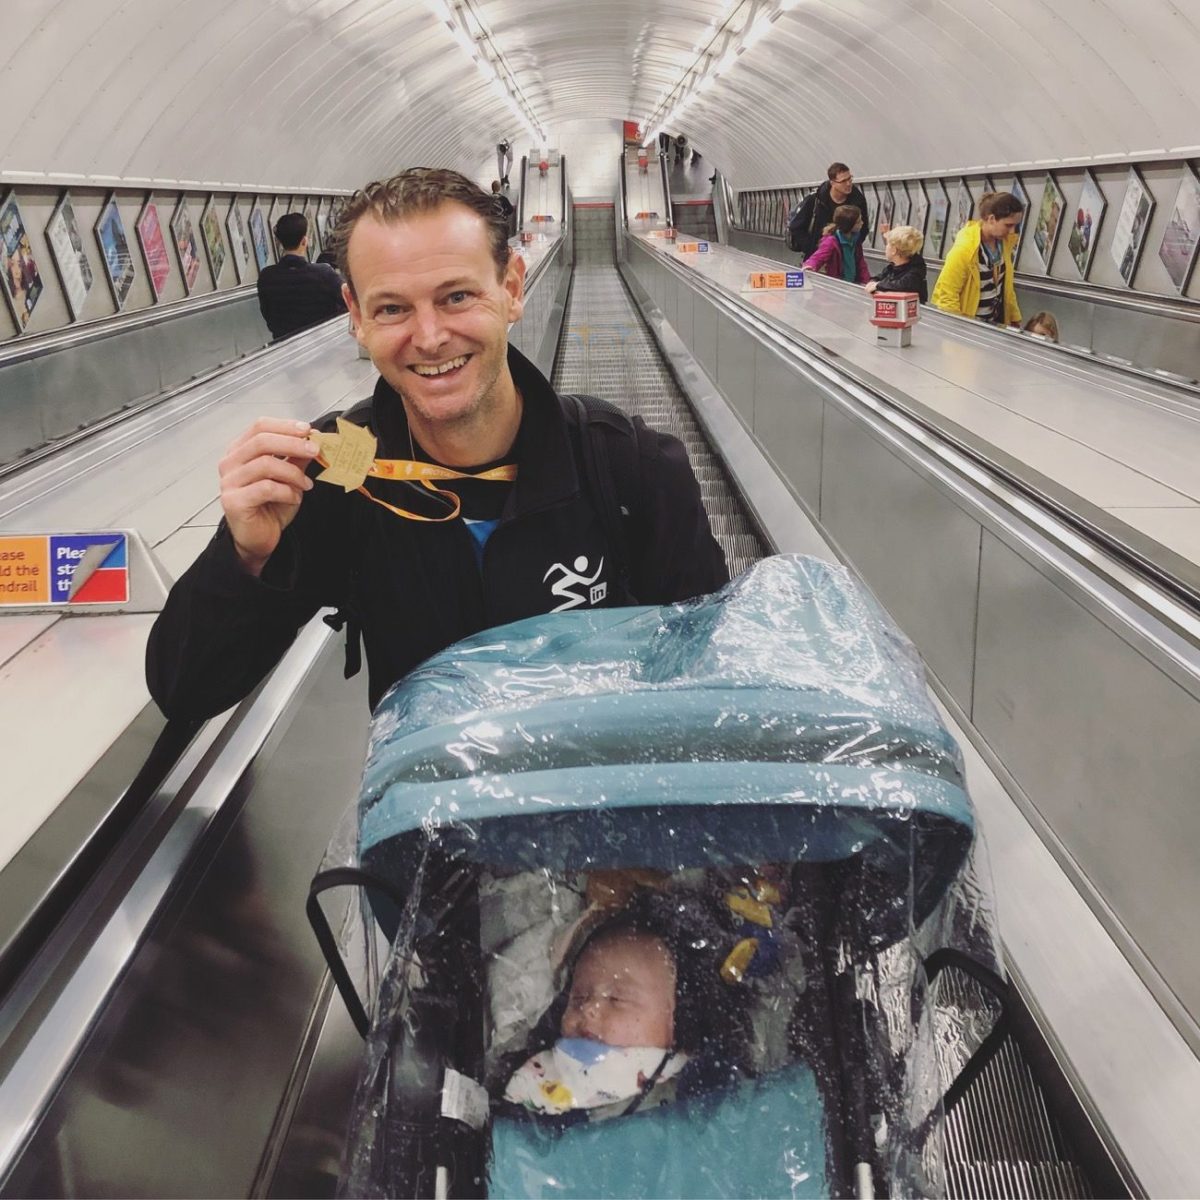 A night in London with baby - Penelope, Parker & Baby